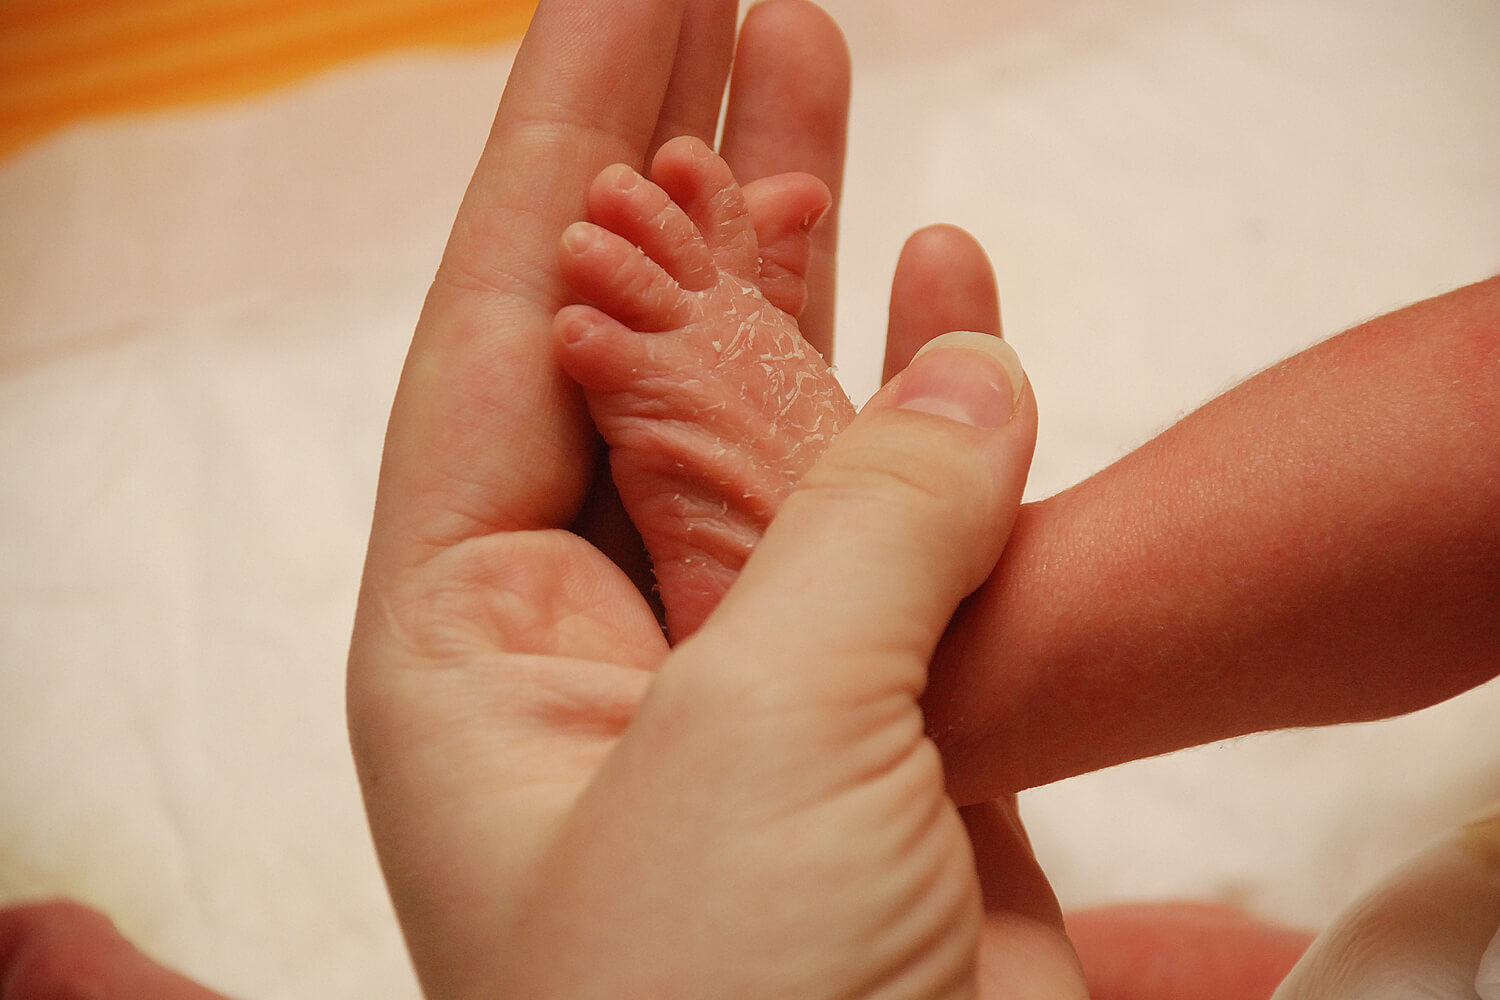 Dry Skin In Babies Causes, Symptoms And Ways To Prevent